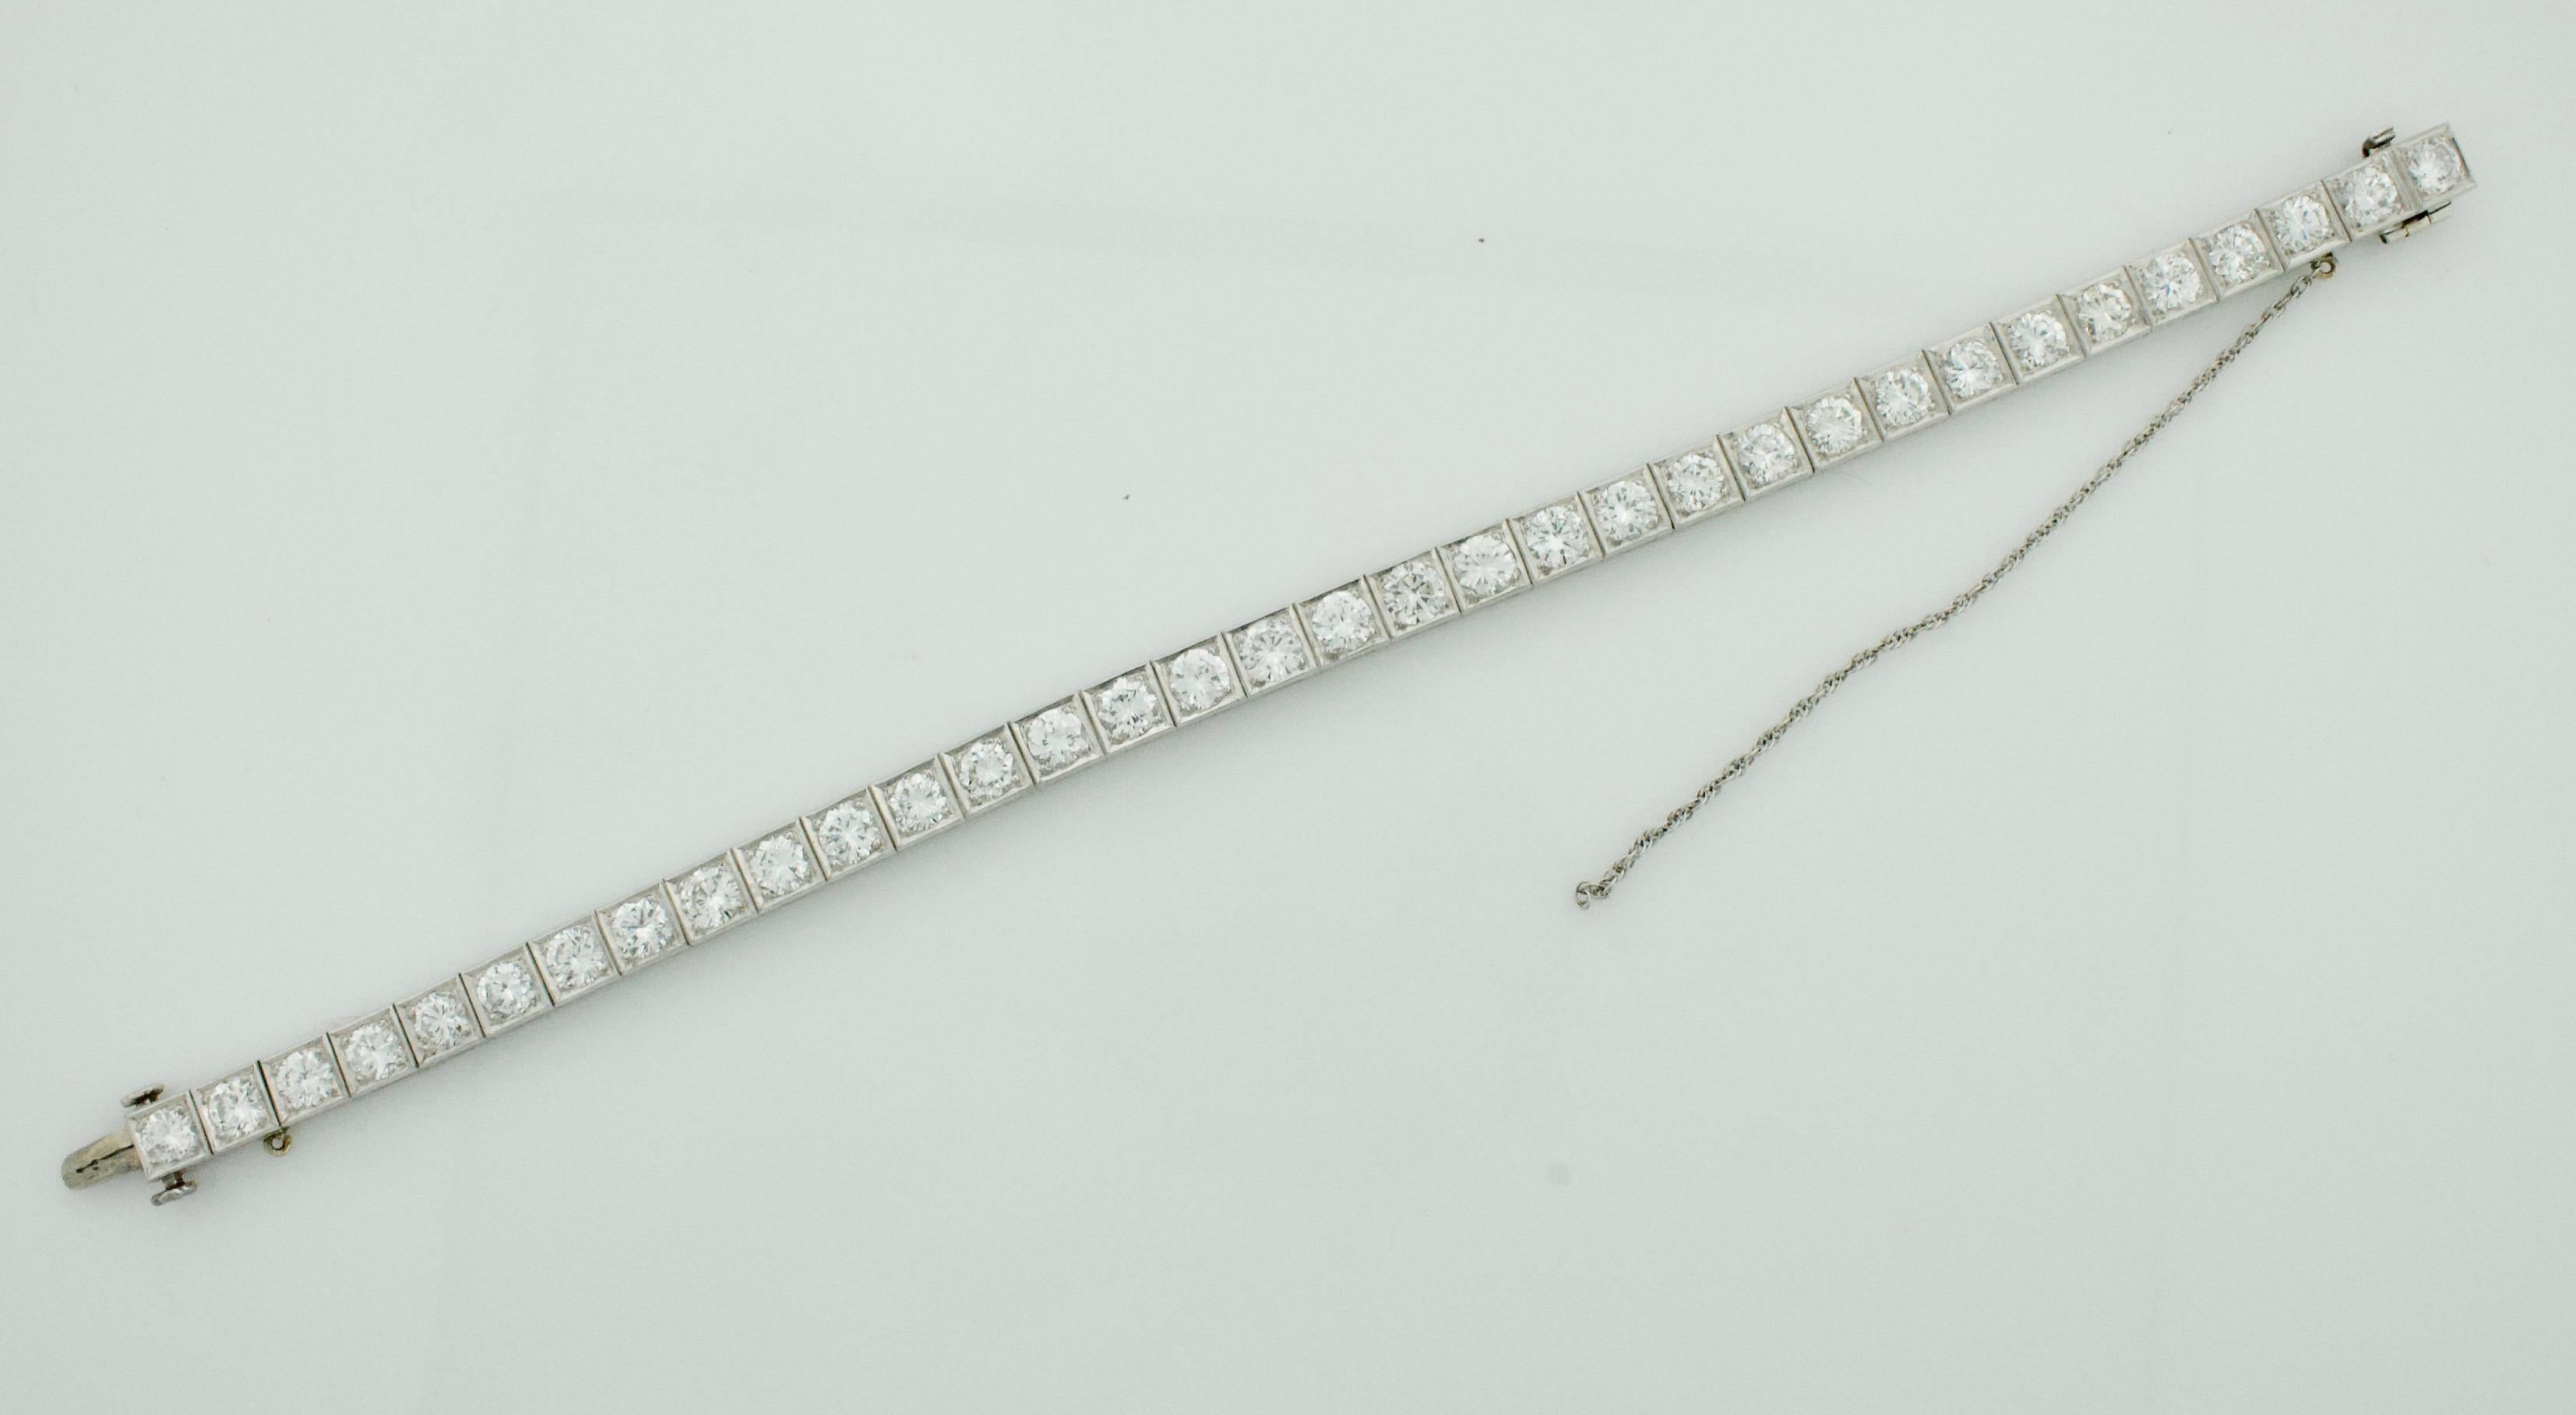 Estate Vintage Platinum Straight Line Bracelet  Circa 1950's 9.00 Carats Total 

Introducing a stunning Estate Vintage Platinum Straight Line Bracelet from the 1950s, featuring 34 round brilliant cut diamonds with a total weight of 9.00 carats